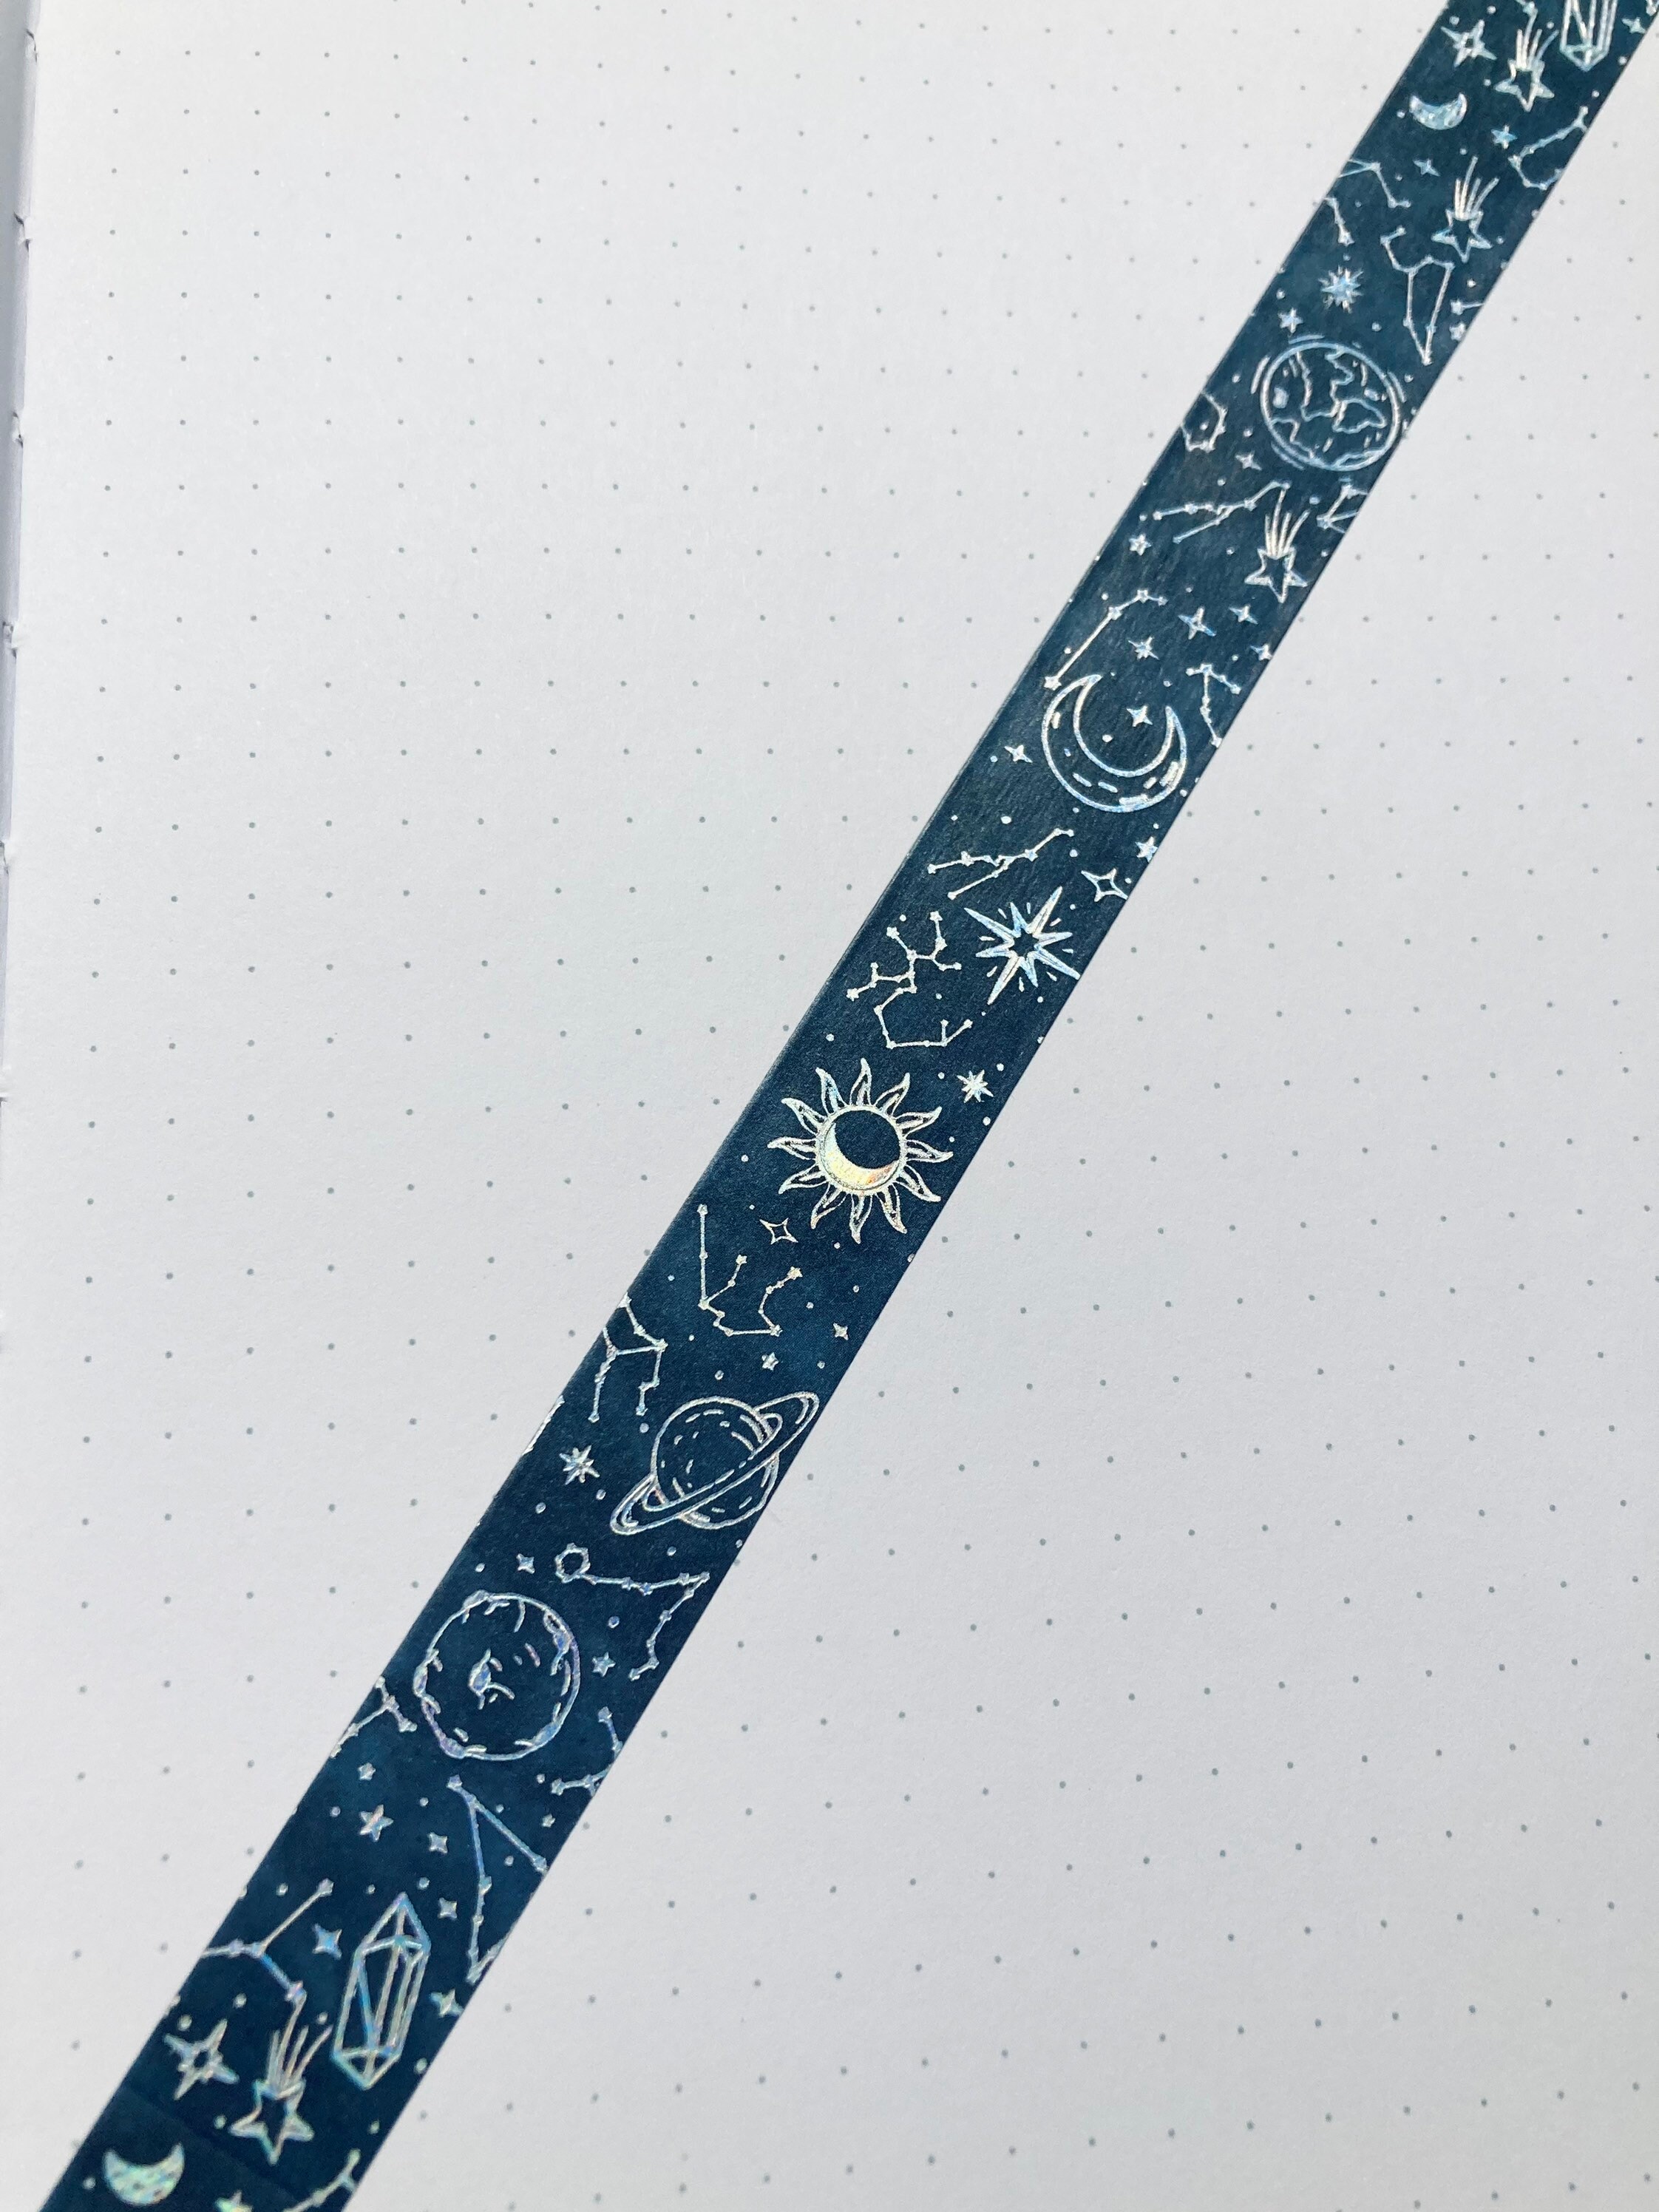 In the Clouds - holographic foil washi tape – Moonlume